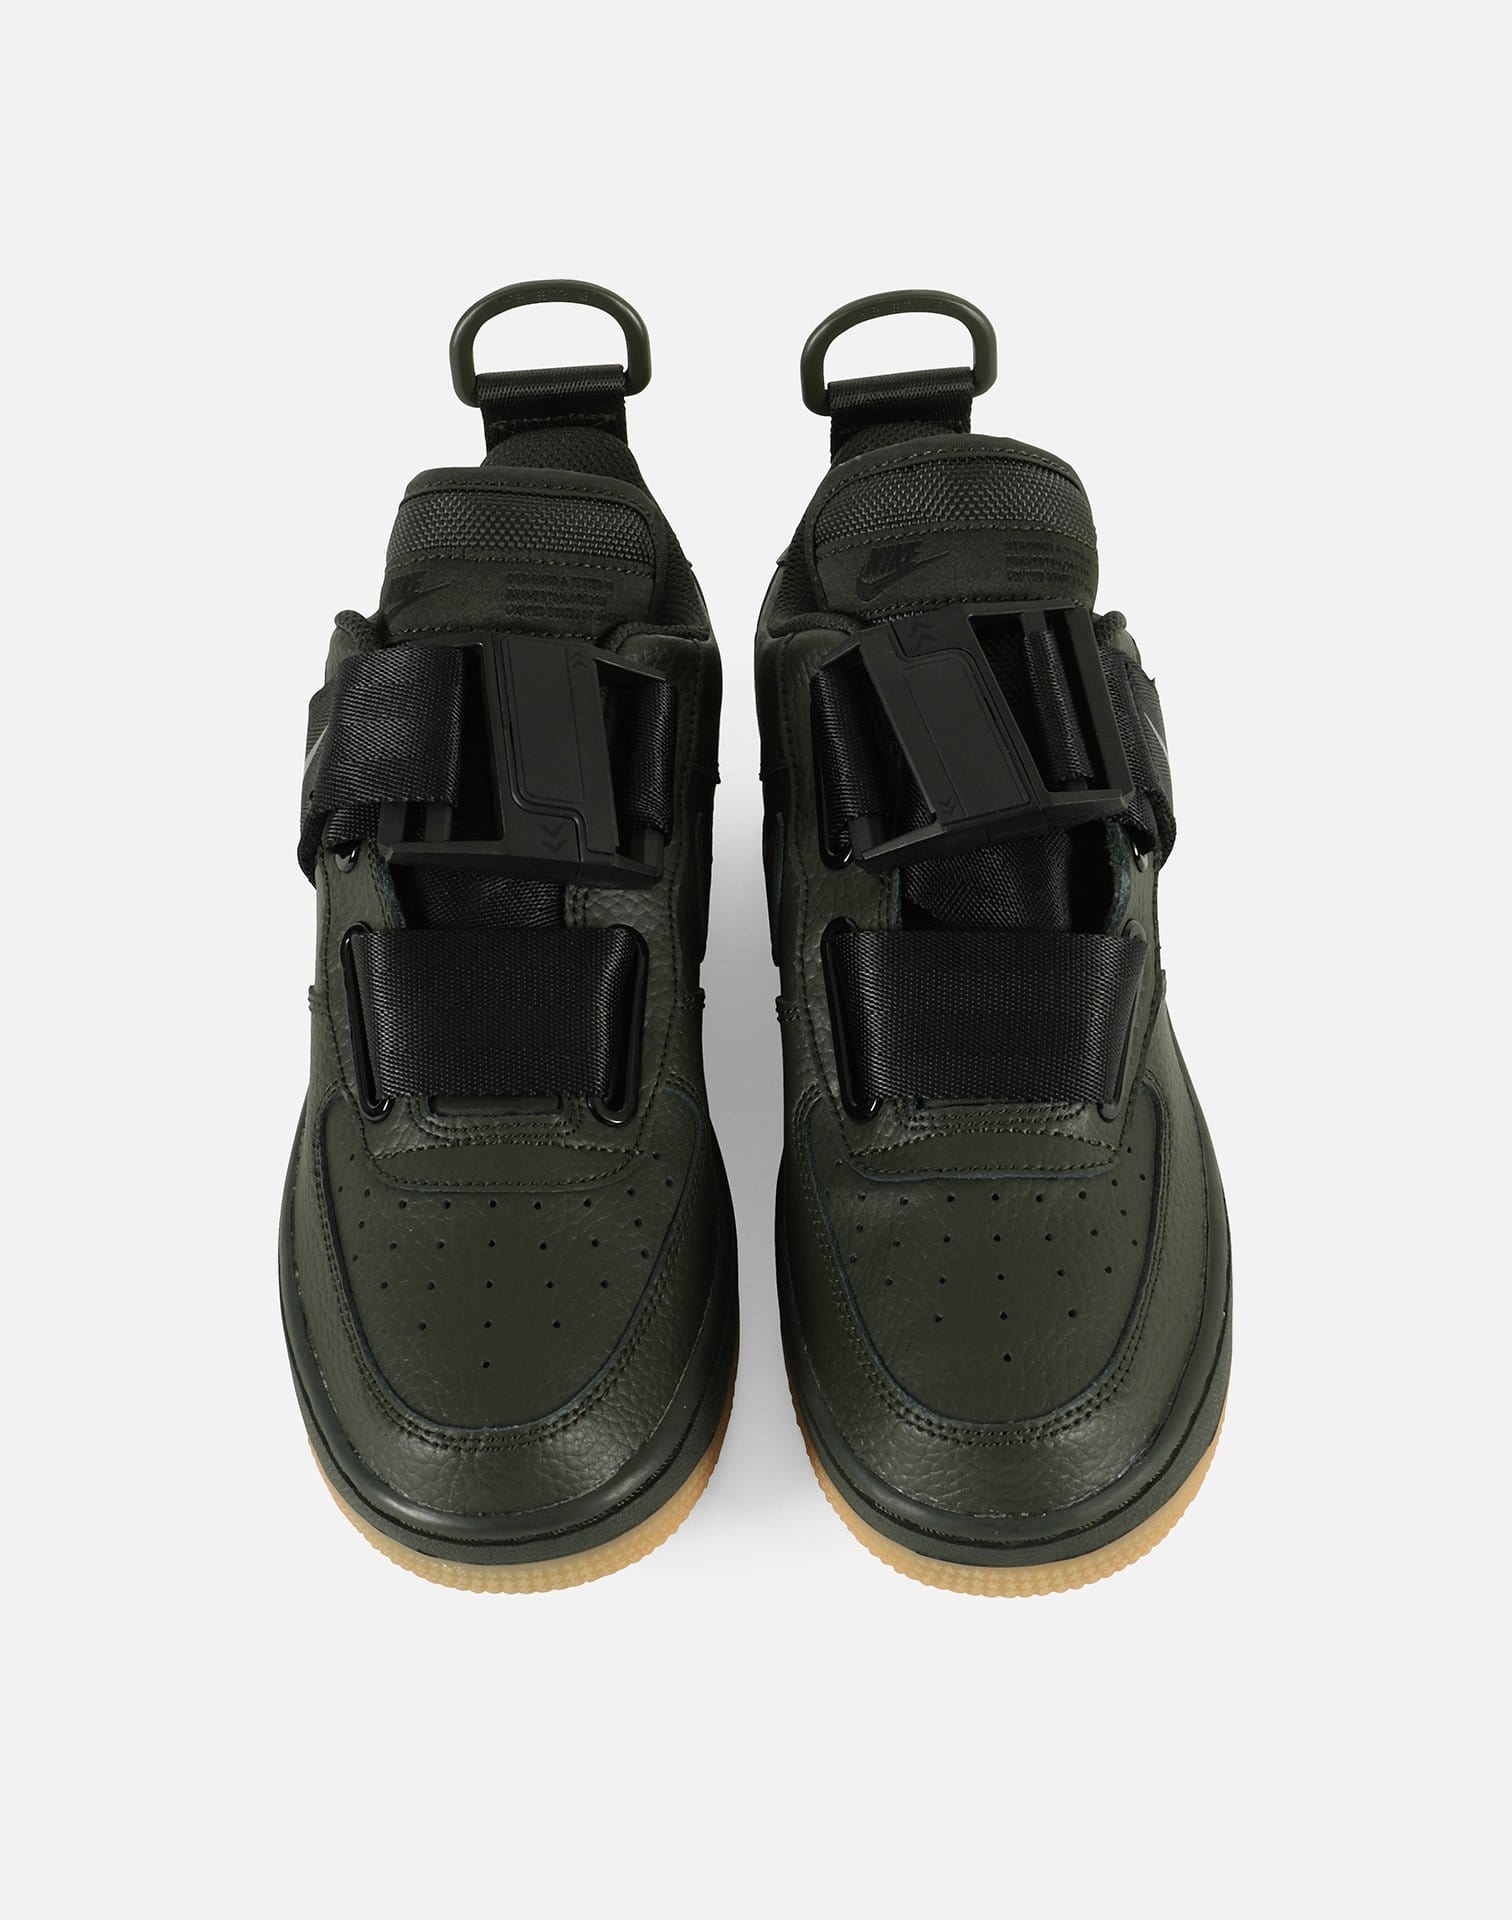 air force 1 olive utility